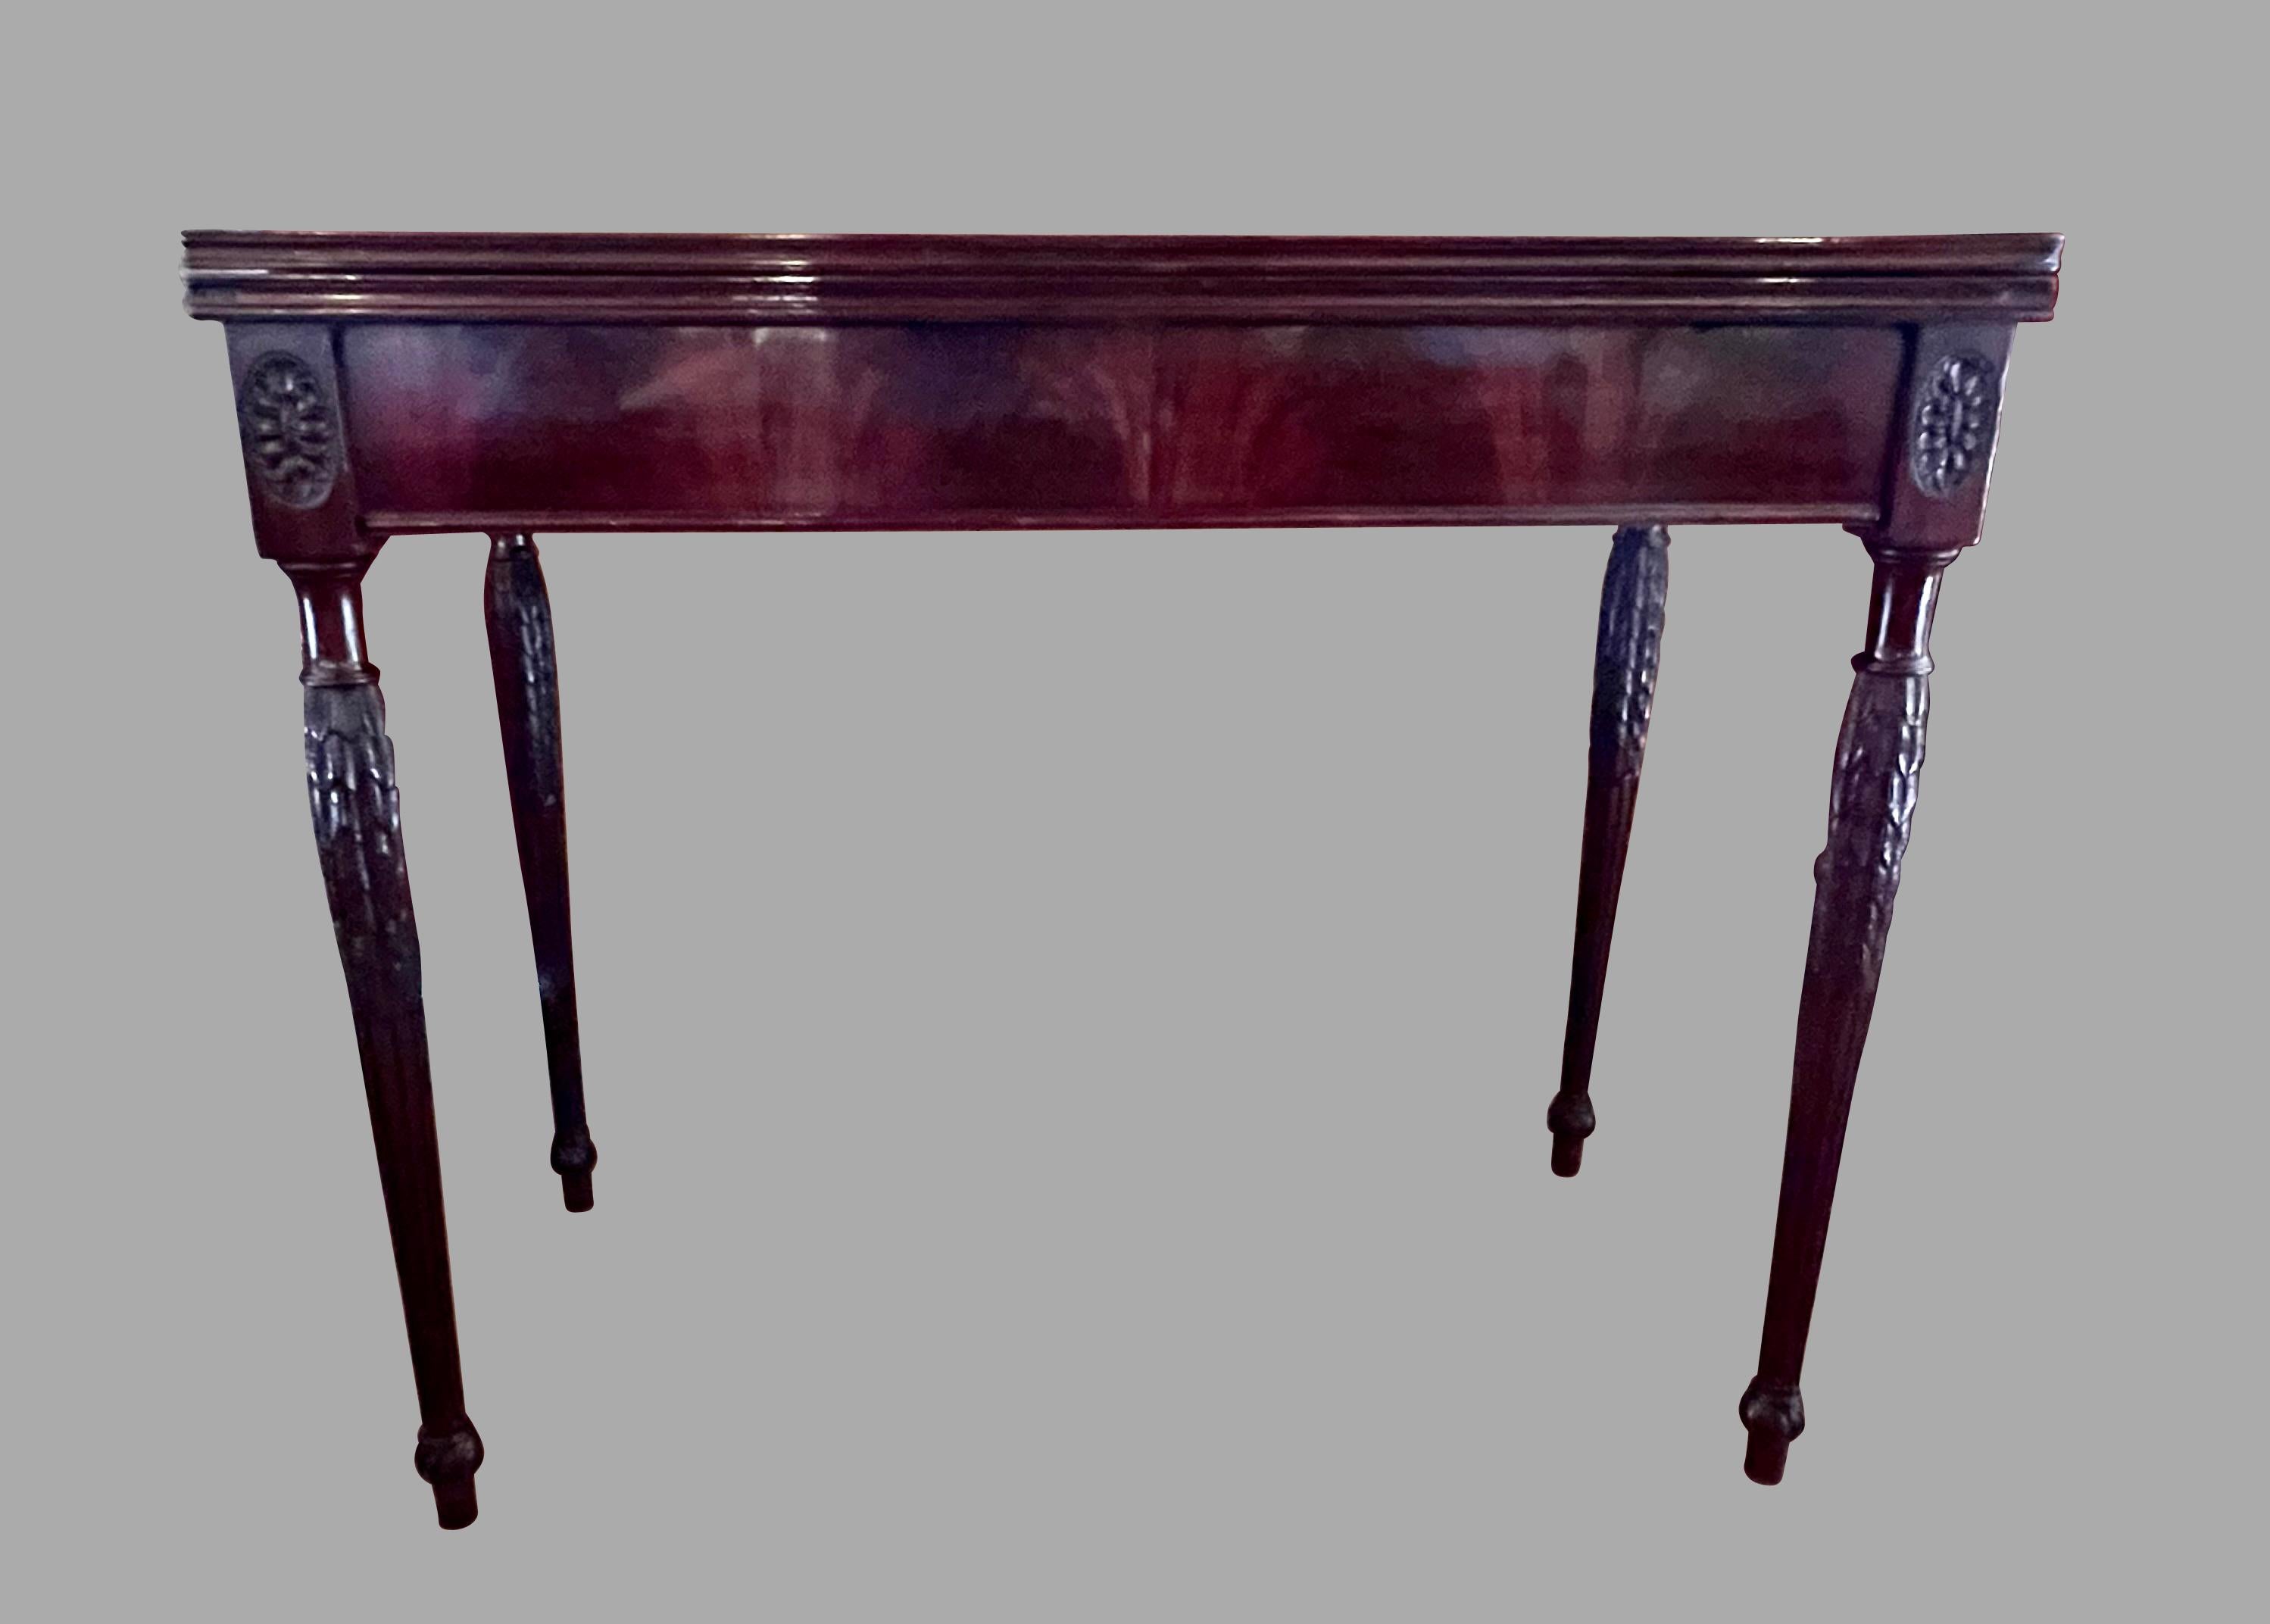 An eighteenth century Sheraton period English mahogany flip top games table, the richly figured deep brown French polished top opens to reveal a gilt-tooled brown leather surface supported by 2 swinging rear legs. The fluted and carved tapered legs